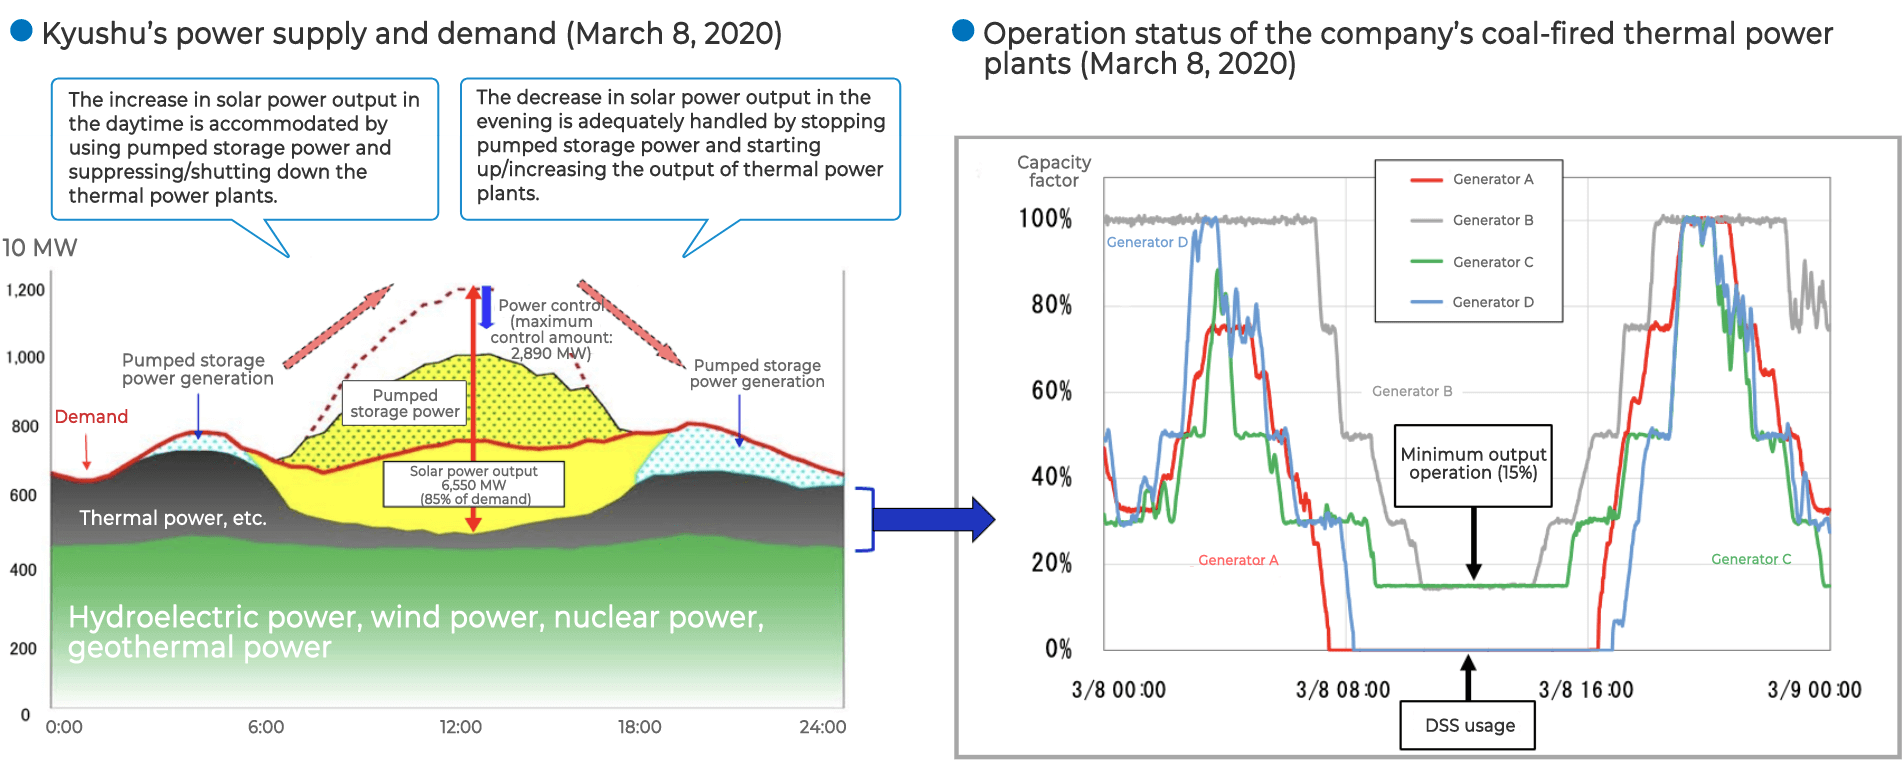 Kyushu’s power supply and demand (March 8, 2020)　Operation status of the company’s coal-fired thermal power plants (March 8, 2020)